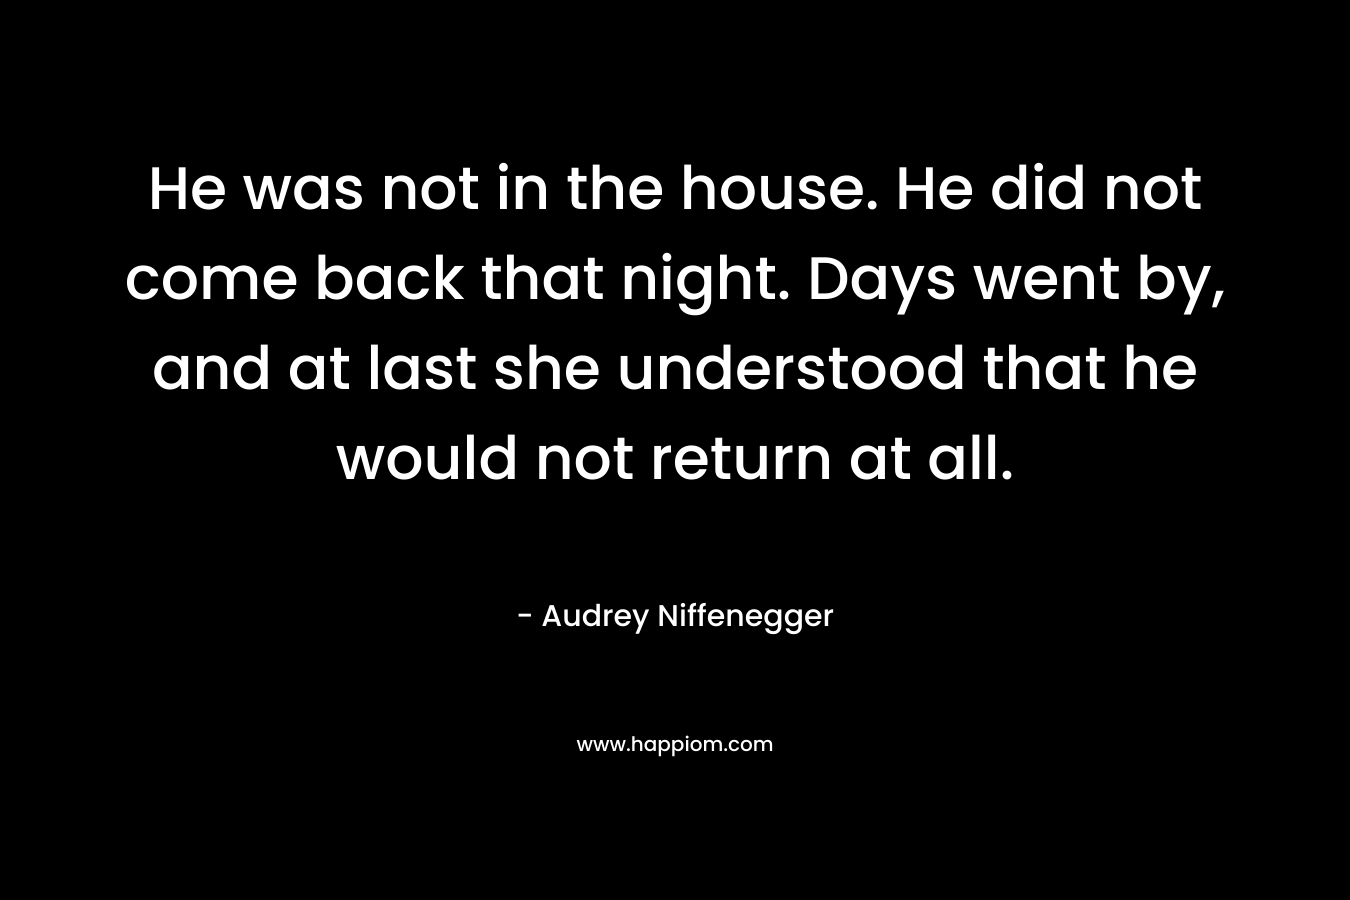 He was not in the house. He did not come back that night. Days went by, and at last she understood that he would not return at all. – Audrey Niffenegger